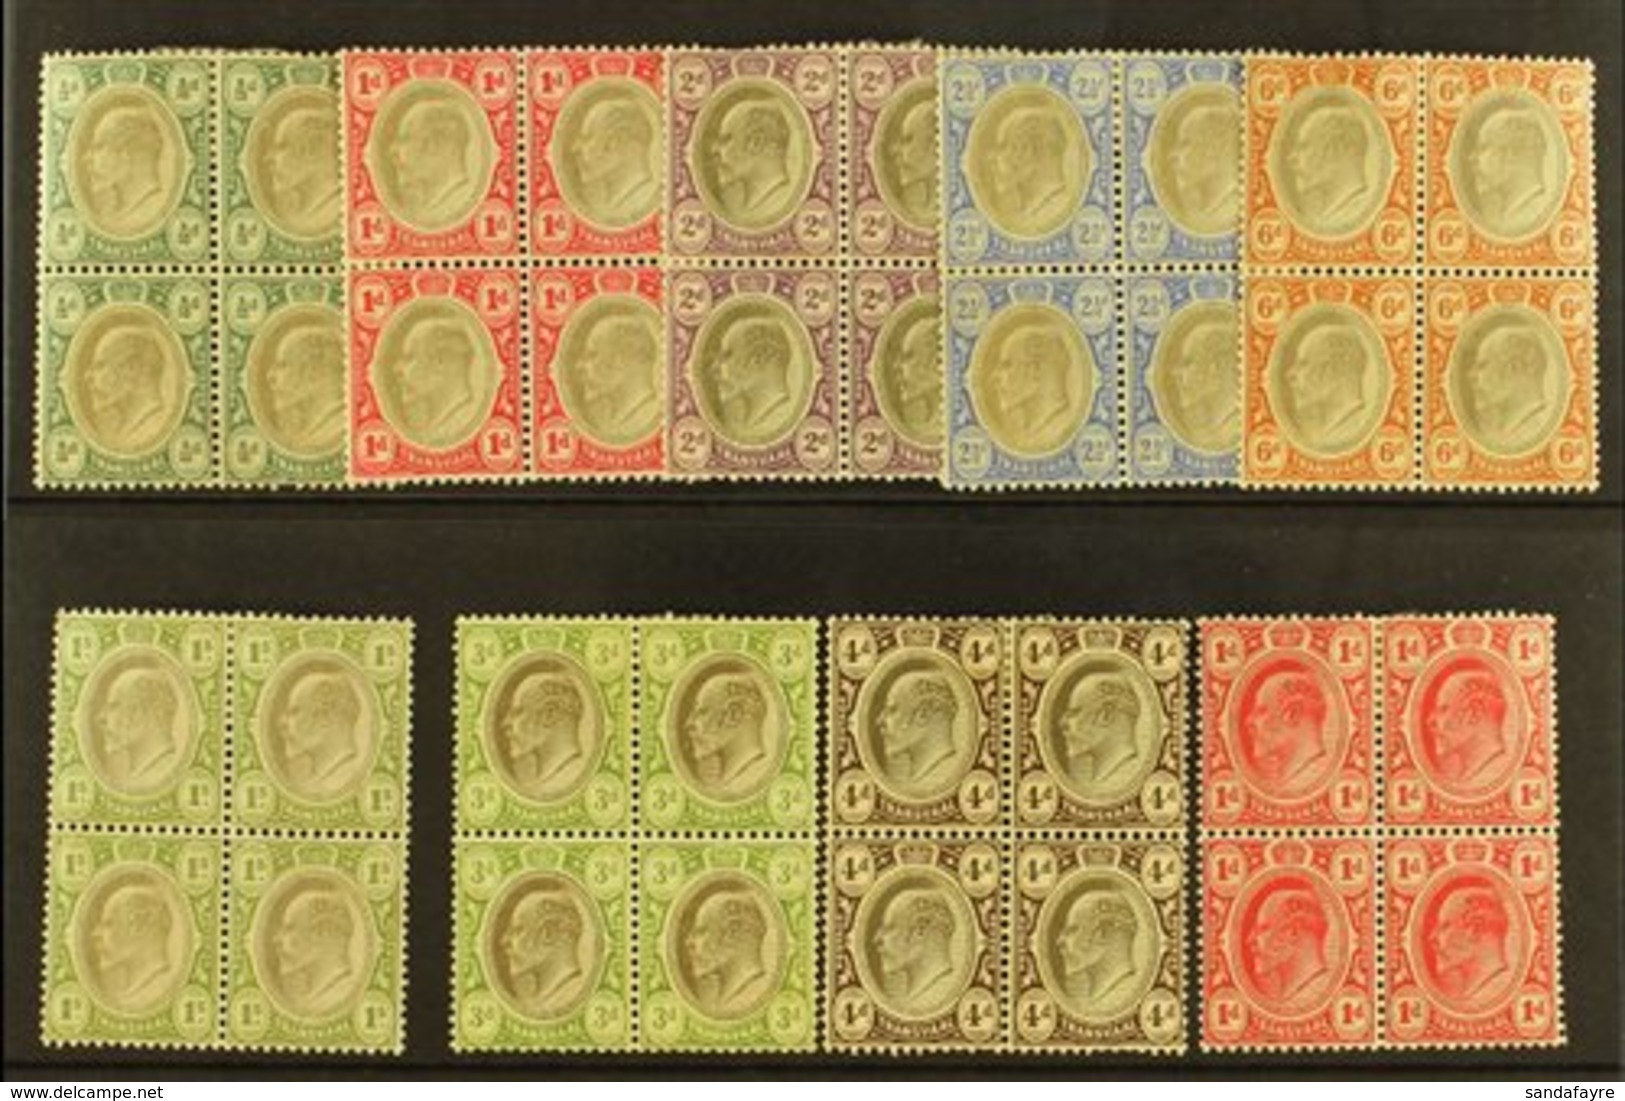 TRANSVAAL 1902-09 BLOCKS OF FOUR And Mint Group With Wmk Crown CA ½d, 1d, 2d, 2½d, 6d, And 1s, SG 244/247, 250/251, Wmk  - Unclassified